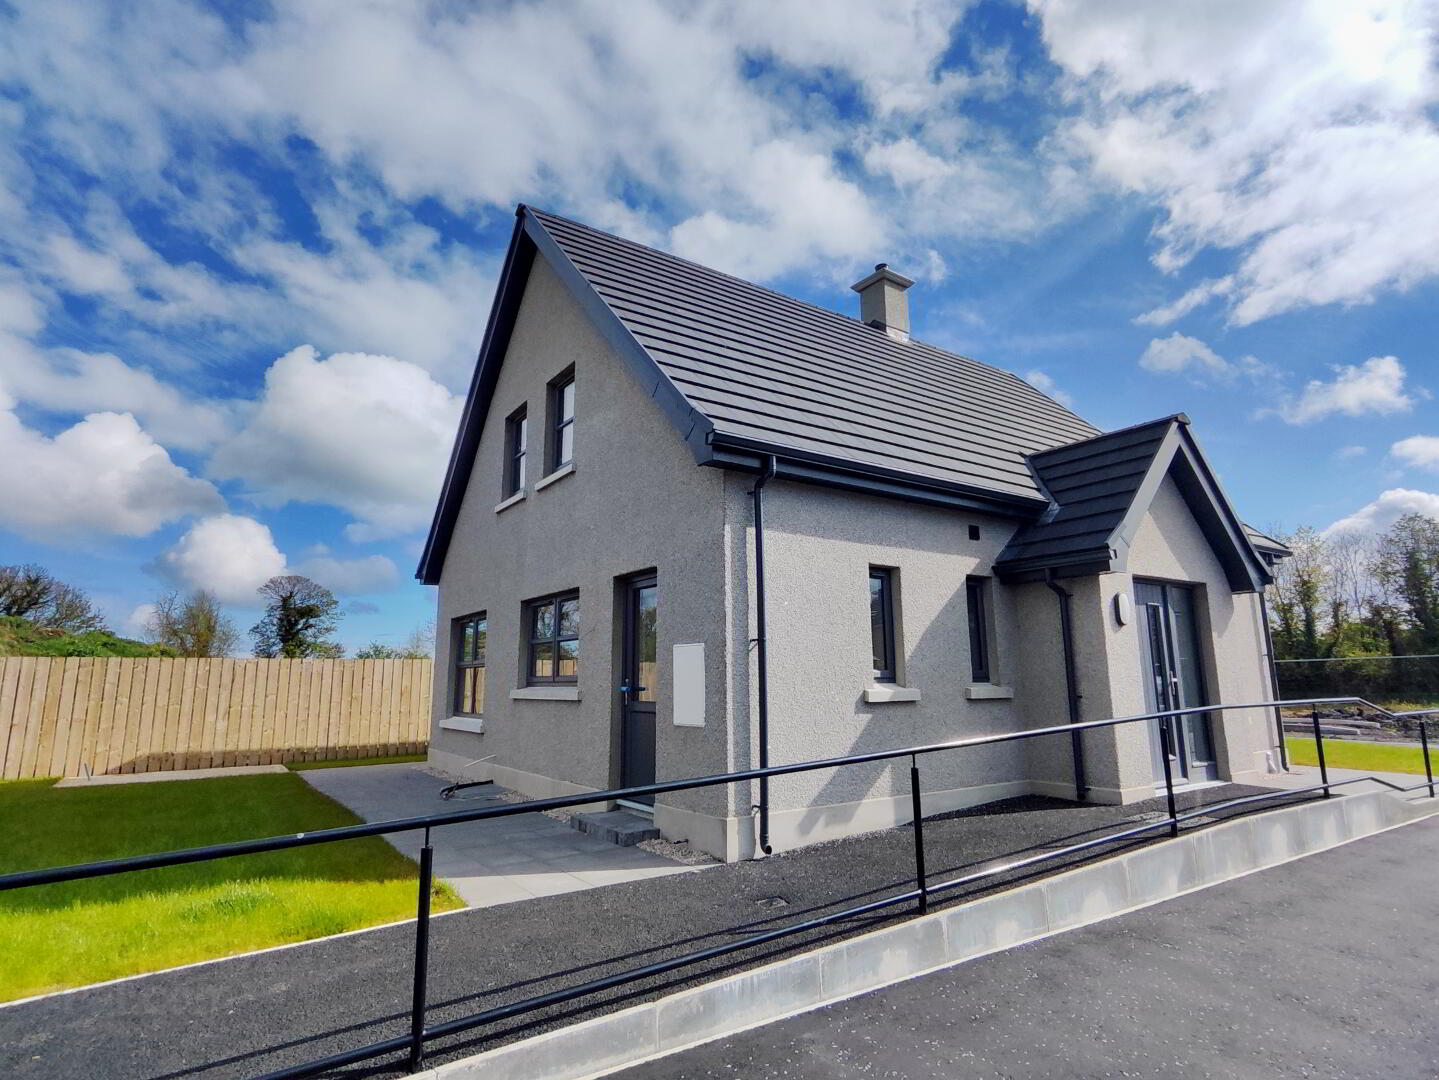 Detached (3 Bed) House Type D